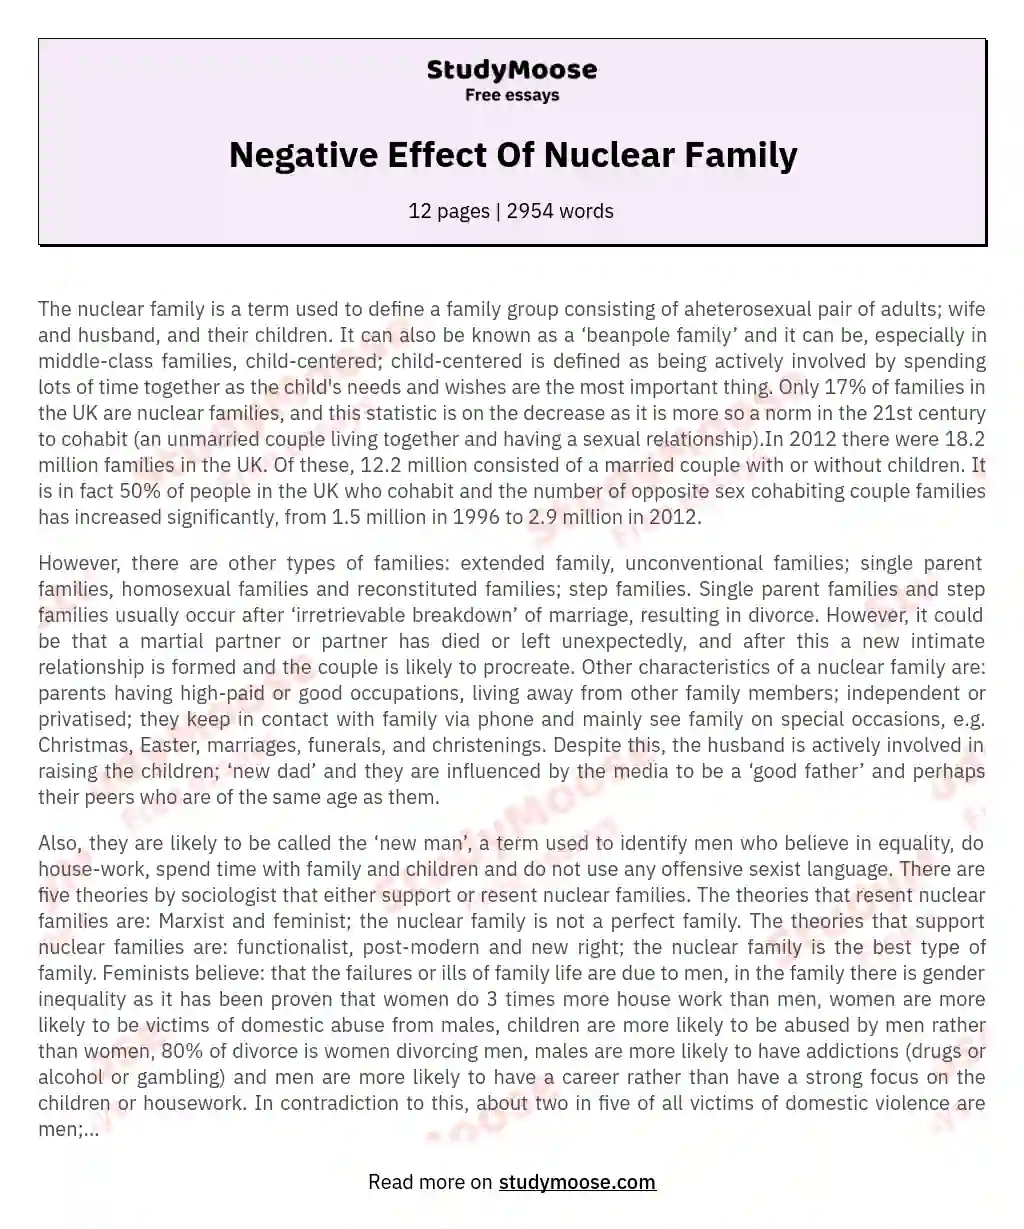 Negative Effect Of Nuclear Family essay